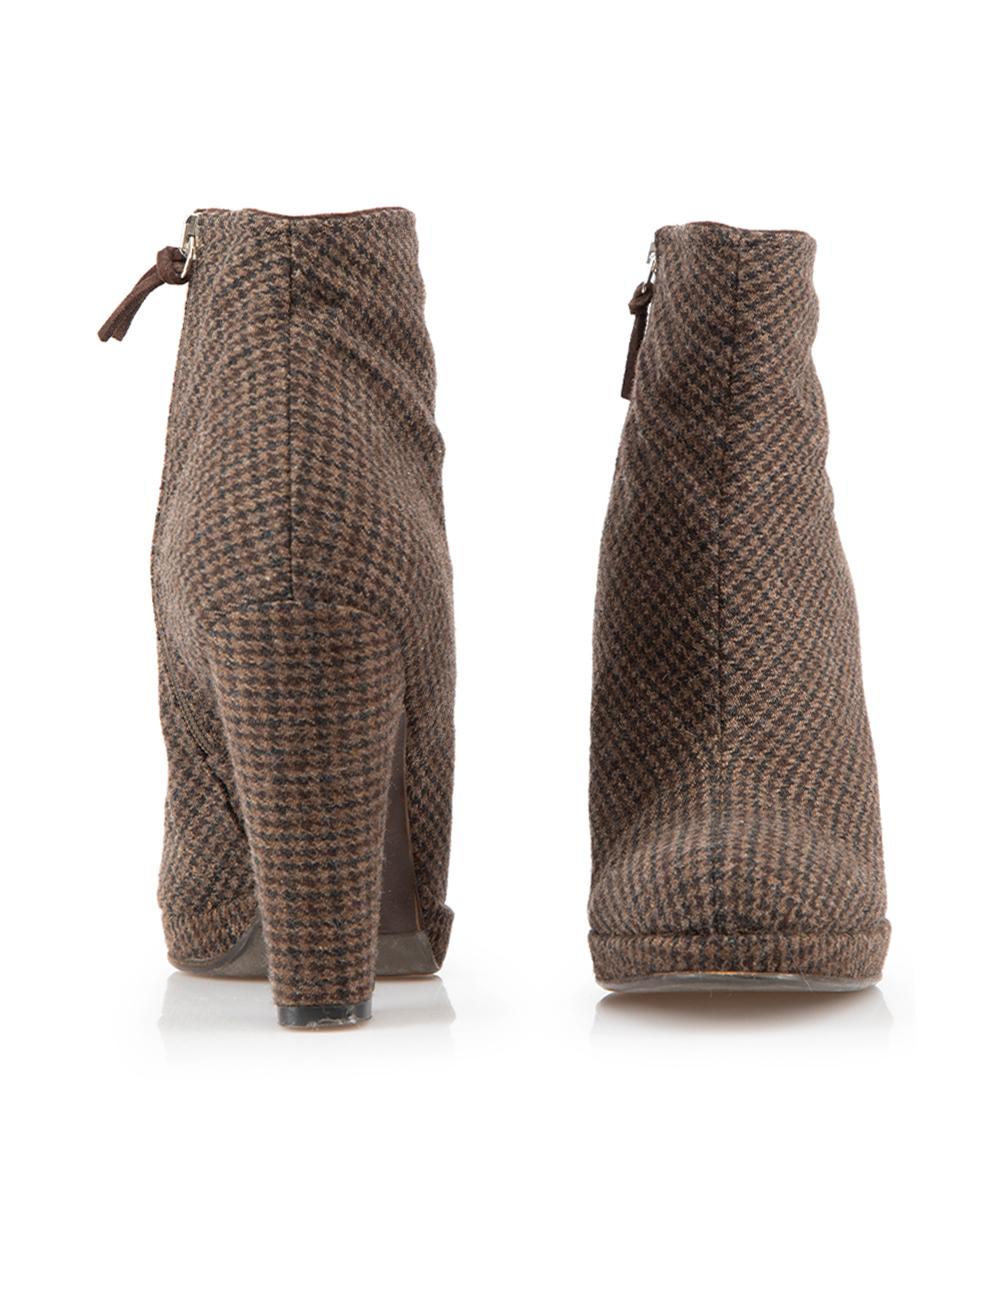 Miu Miu Women's Brown Tweed Houndstooth Ankle Boots In Good Condition For Sale In London, GB